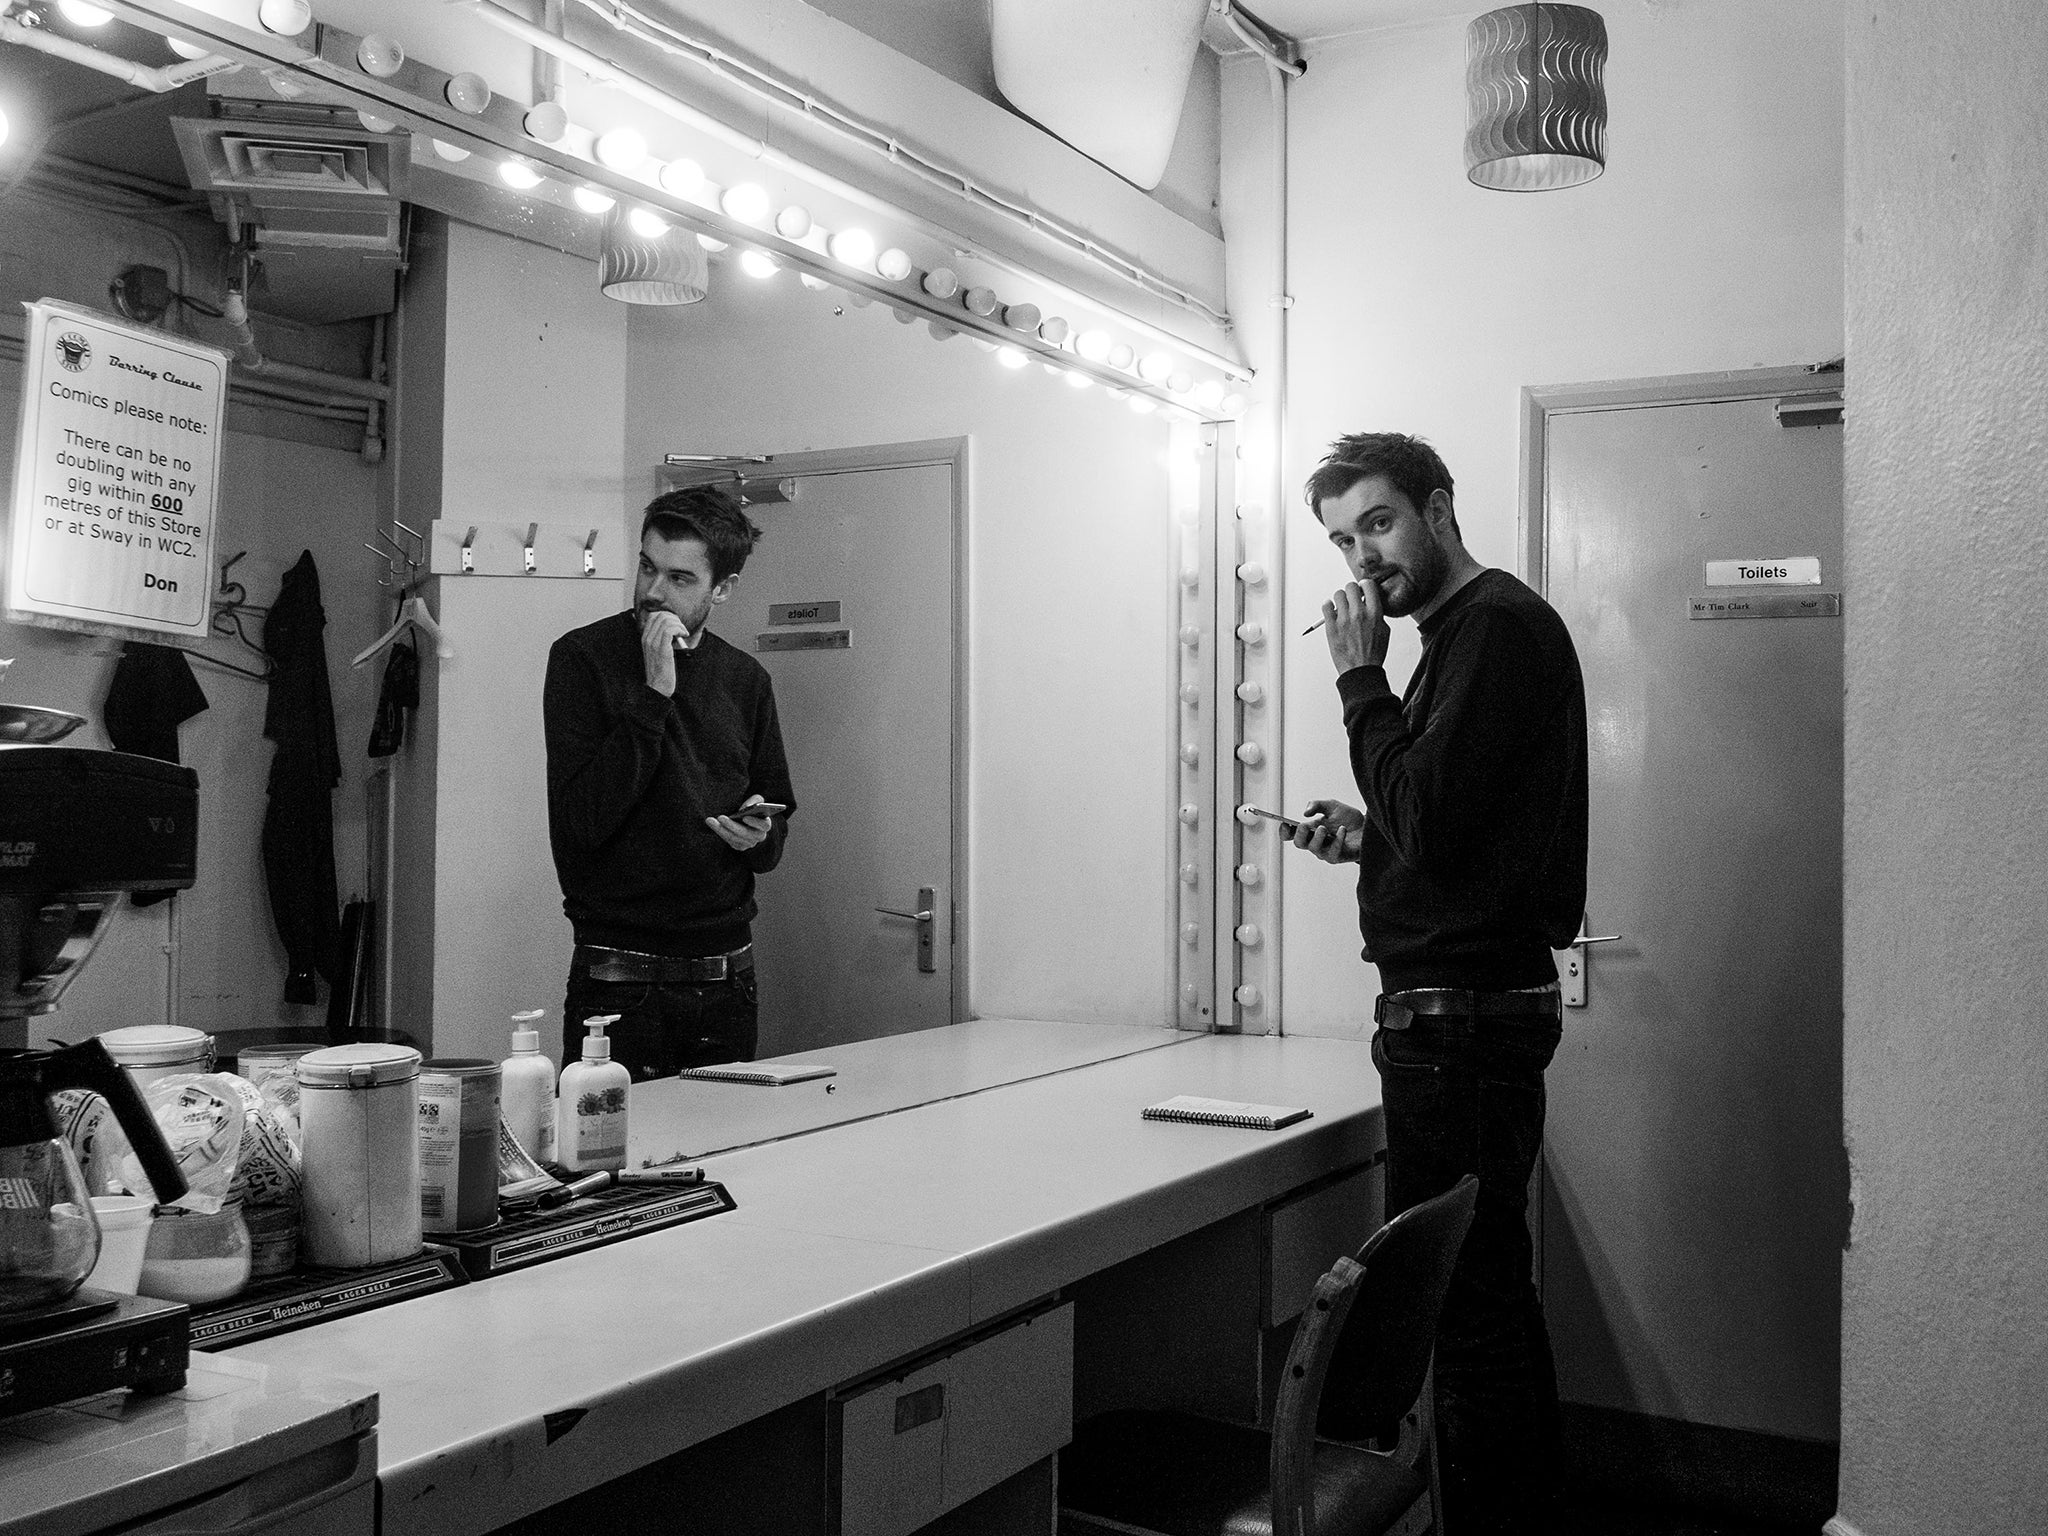 Jack Whitehall looking pensive before taking to the stage